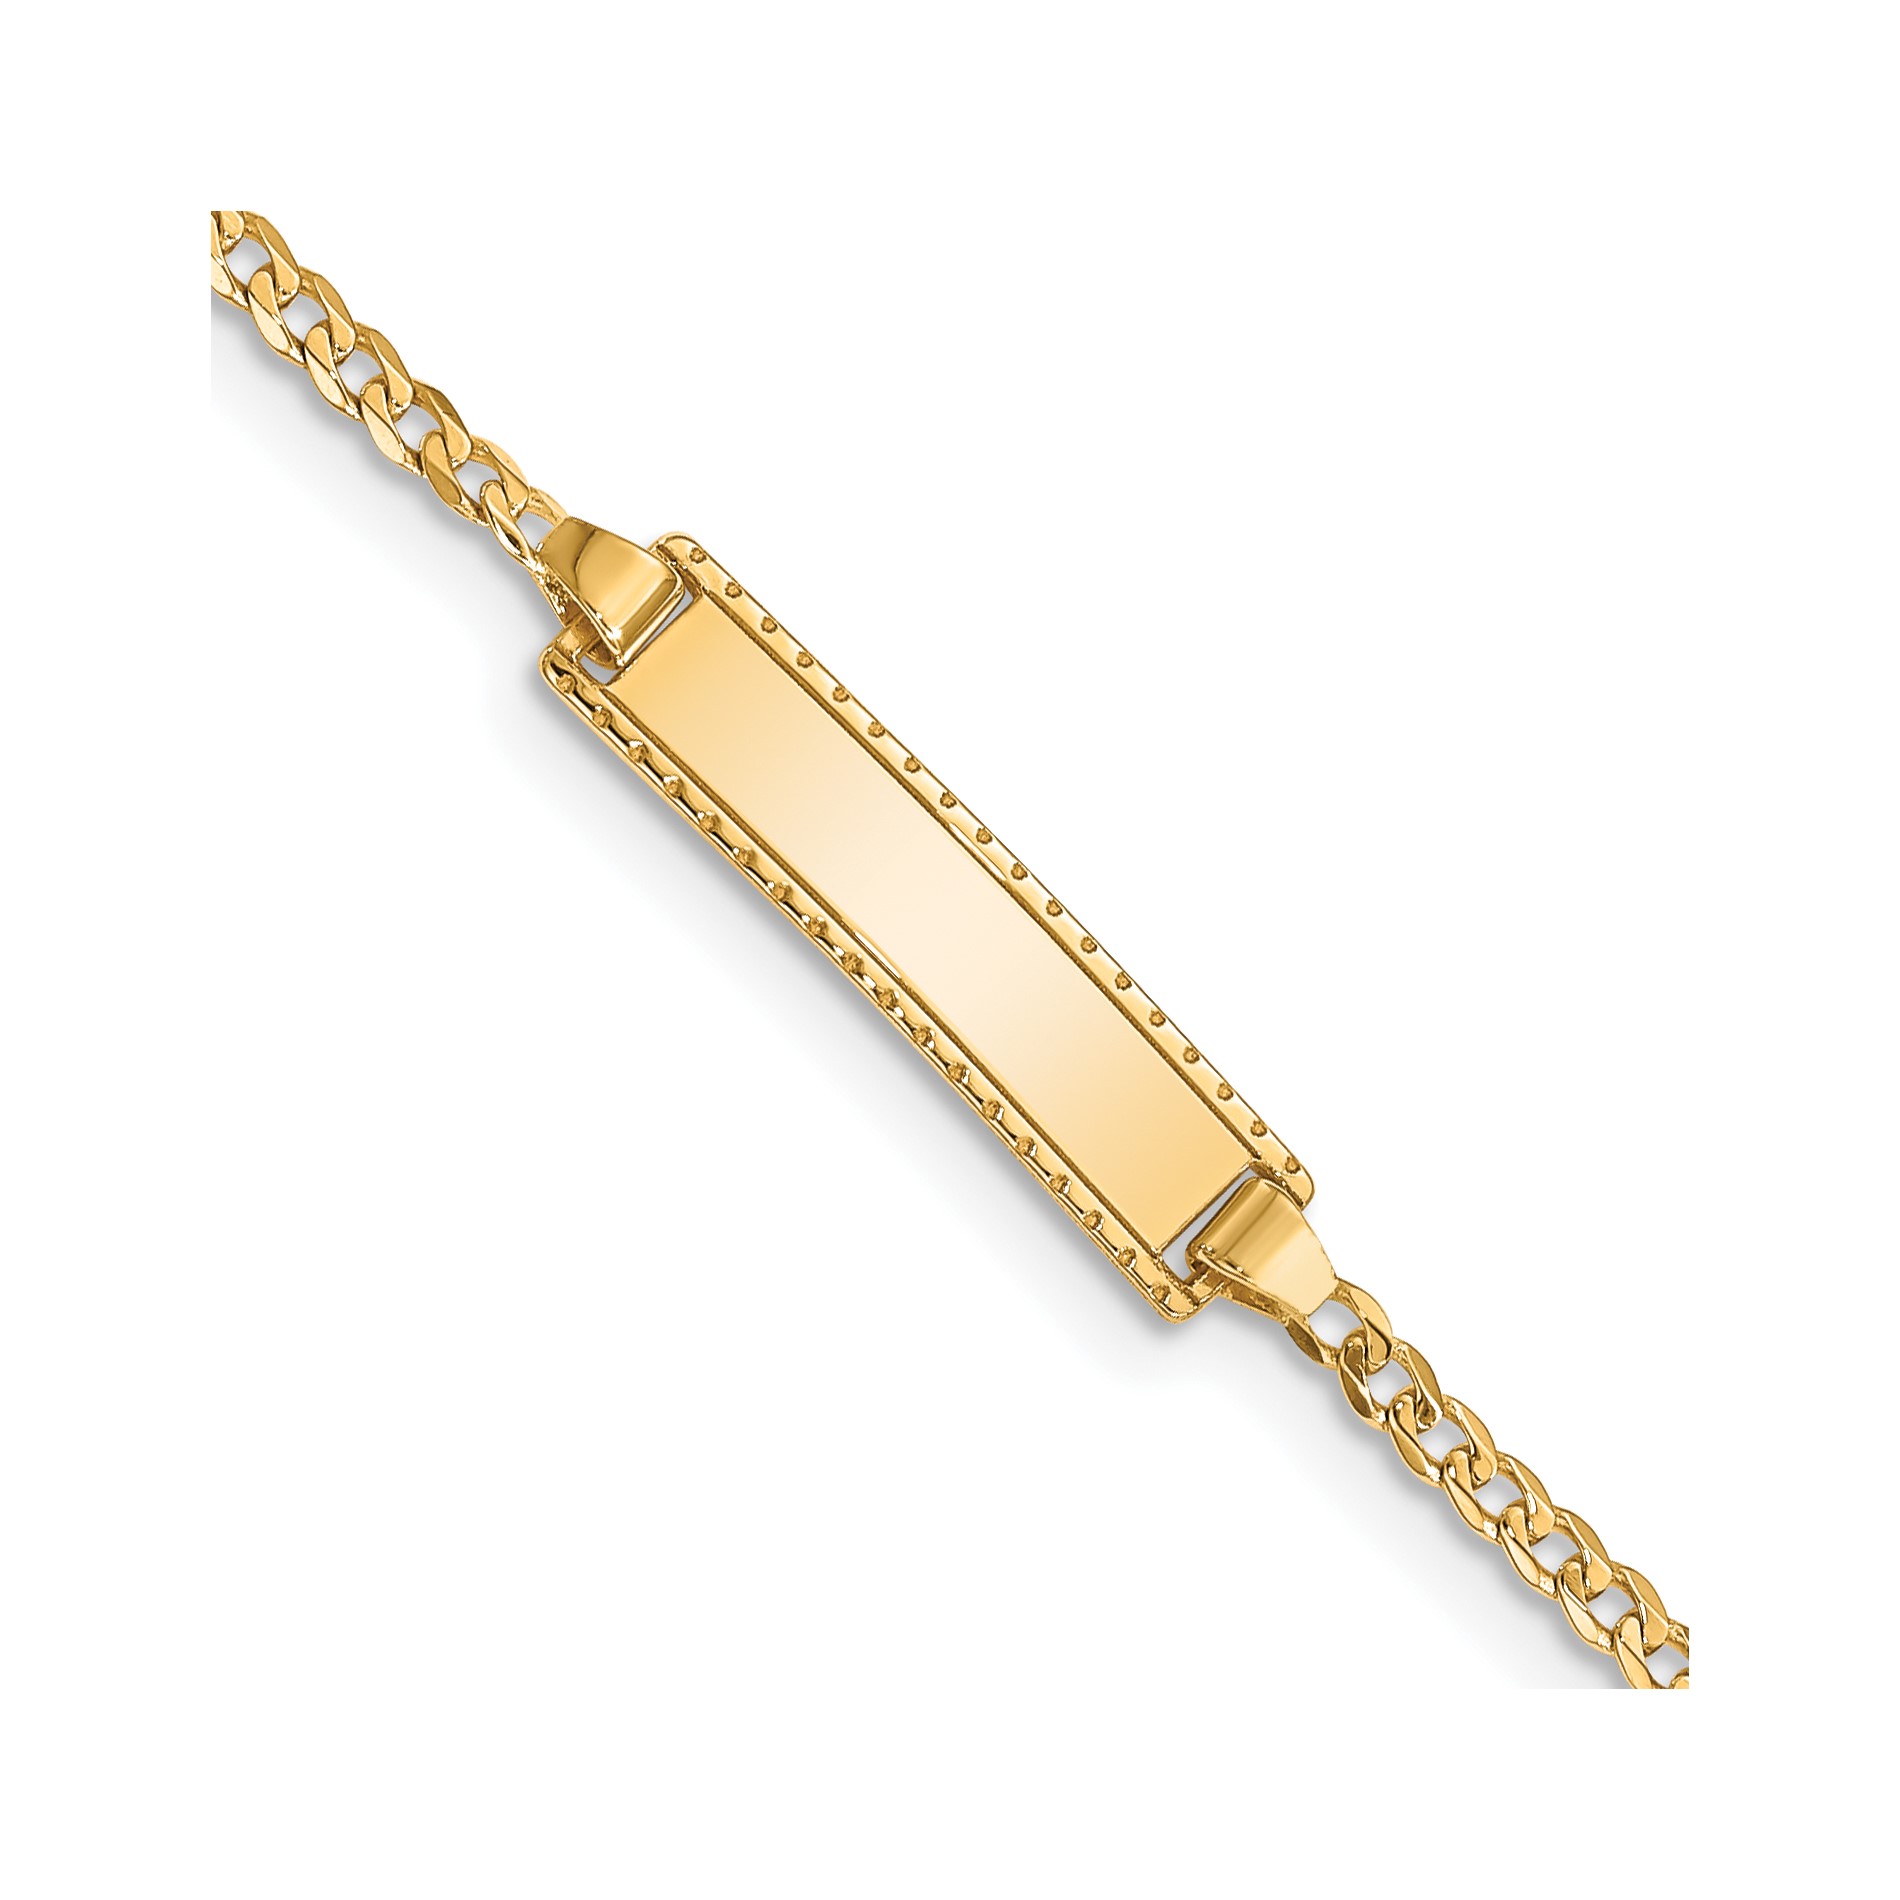 Diamond2Deal 14k Yellow Gold 6in Engraveable Curb Link Baby/Child ID Bracelet 6 inch for women